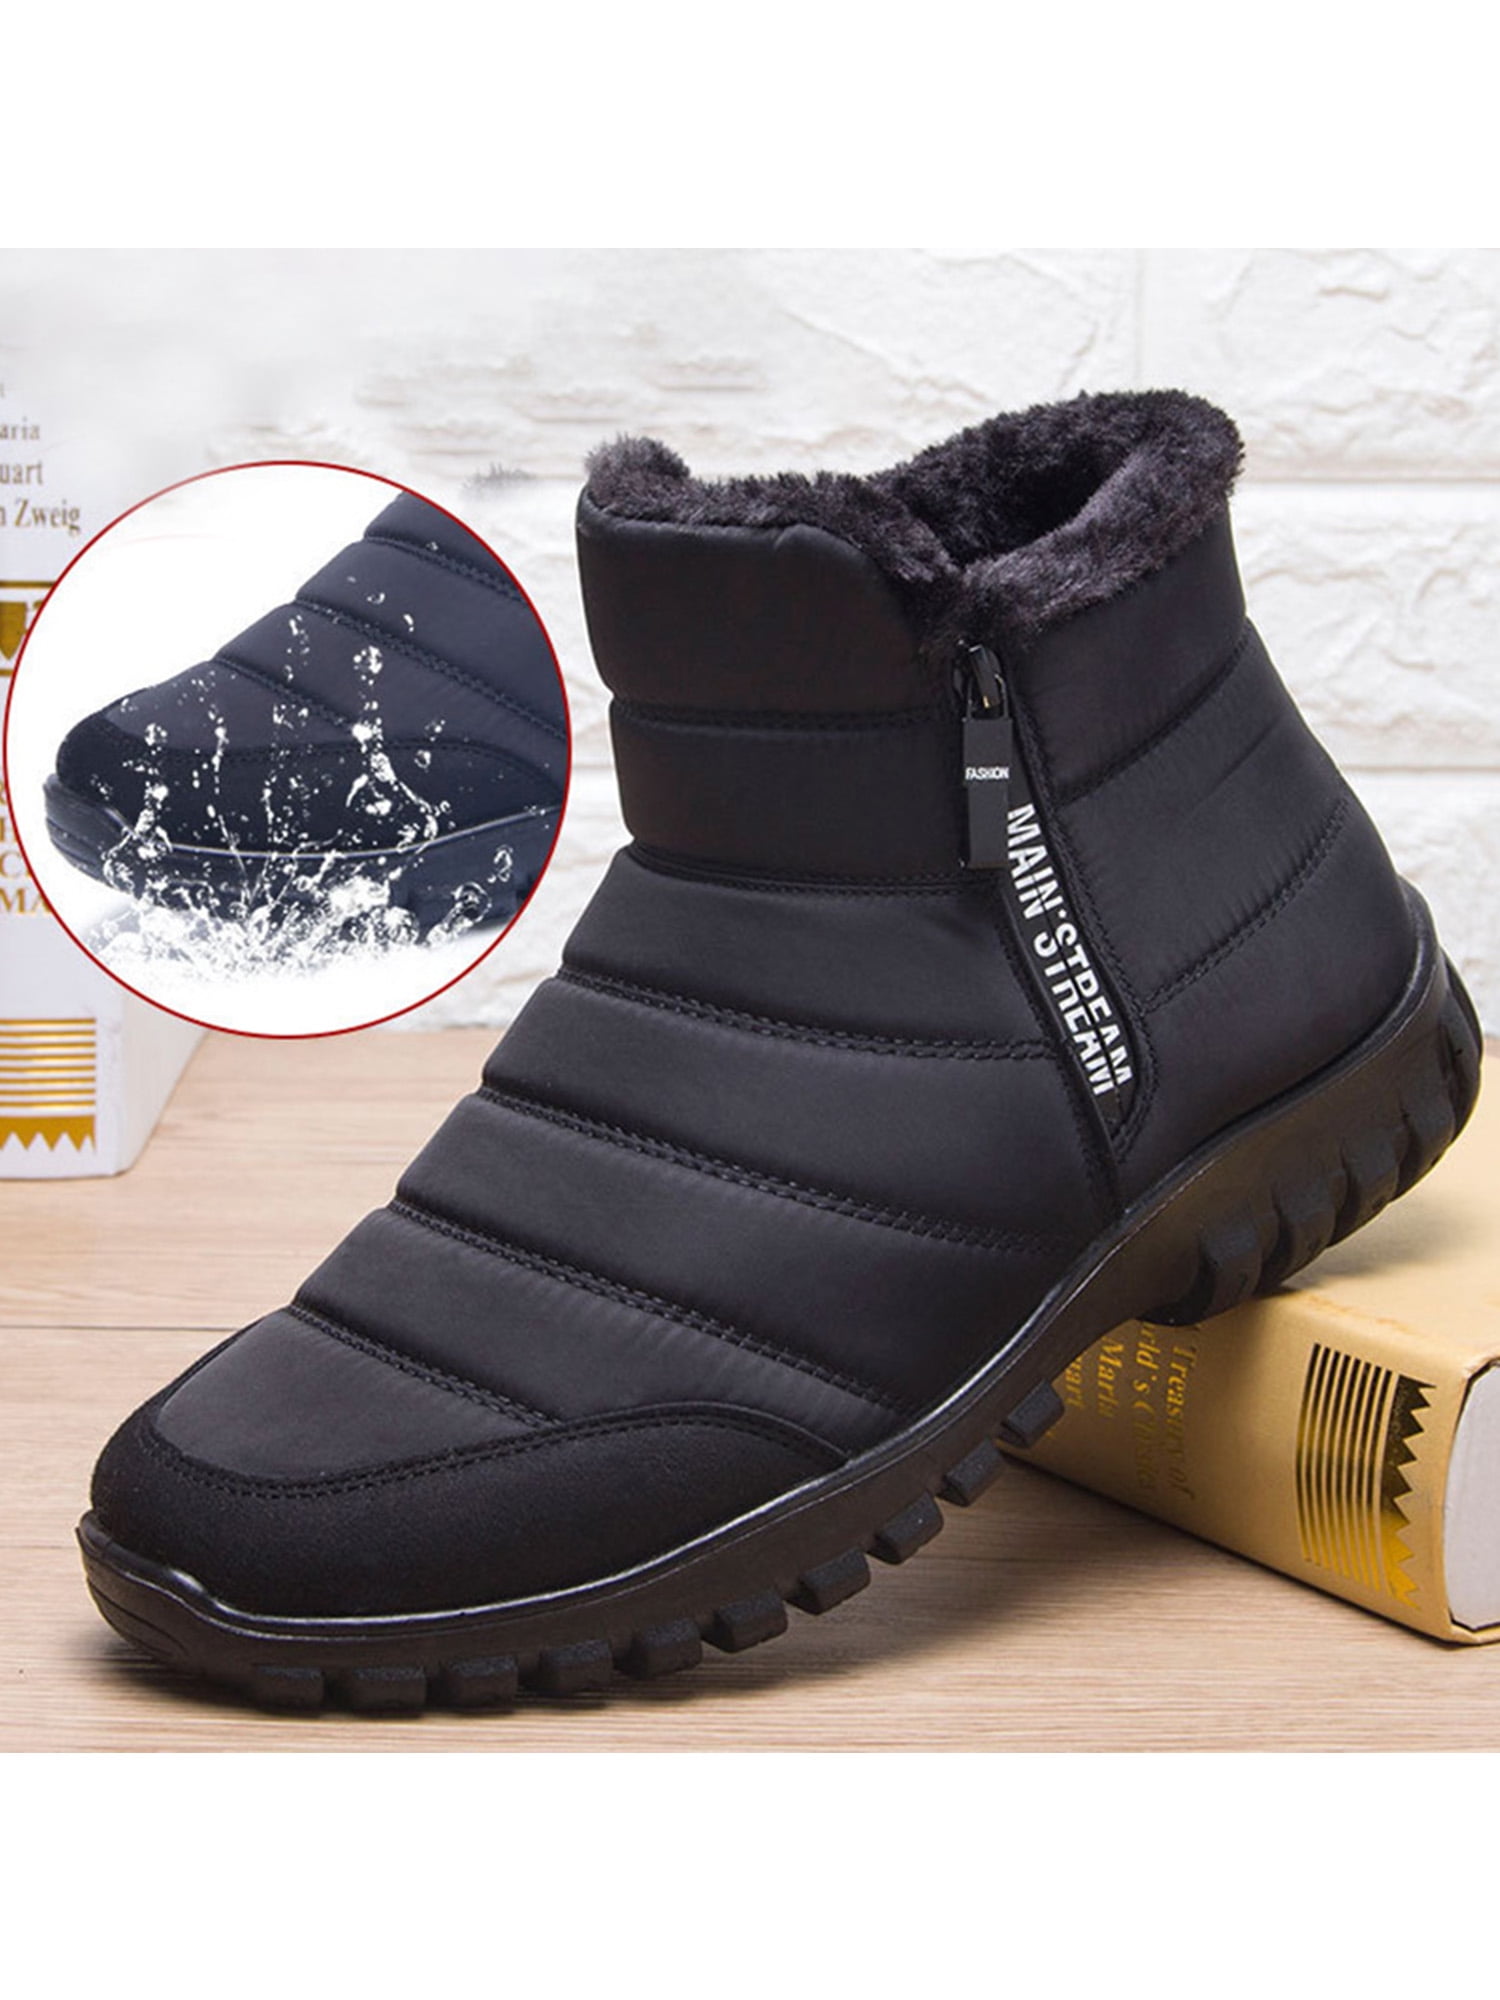 Mens outdoors fur lined Warm Thicken Snow Side Zip Ankle Boots casual Shoes New